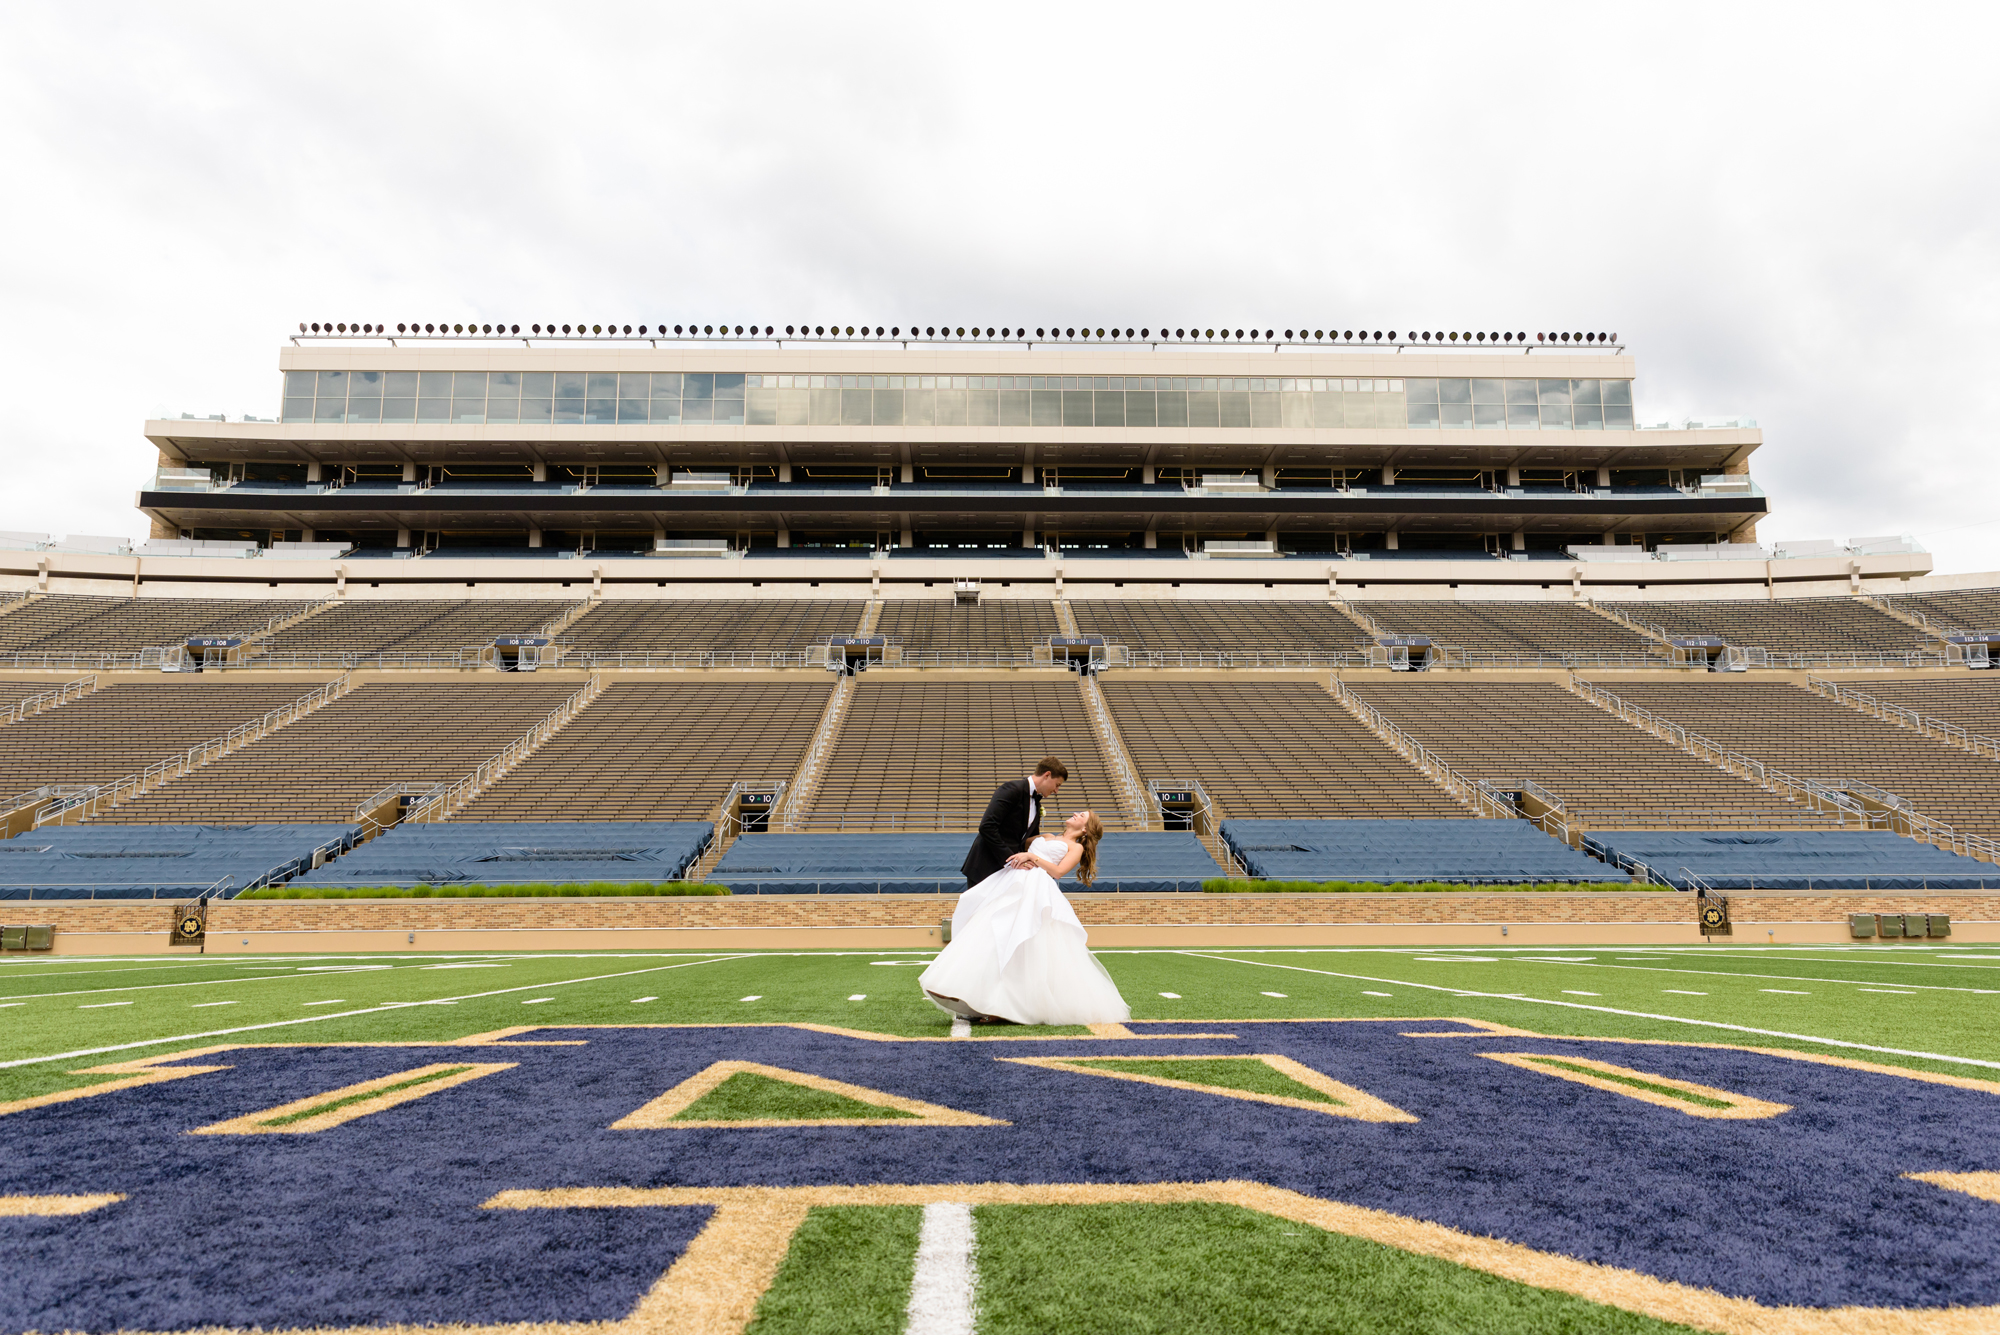 Bride & Groom on Notre Dame football field after their wedding ceremony at the Basilica of the Sacred Heart on the campus of the University of Notre Dame